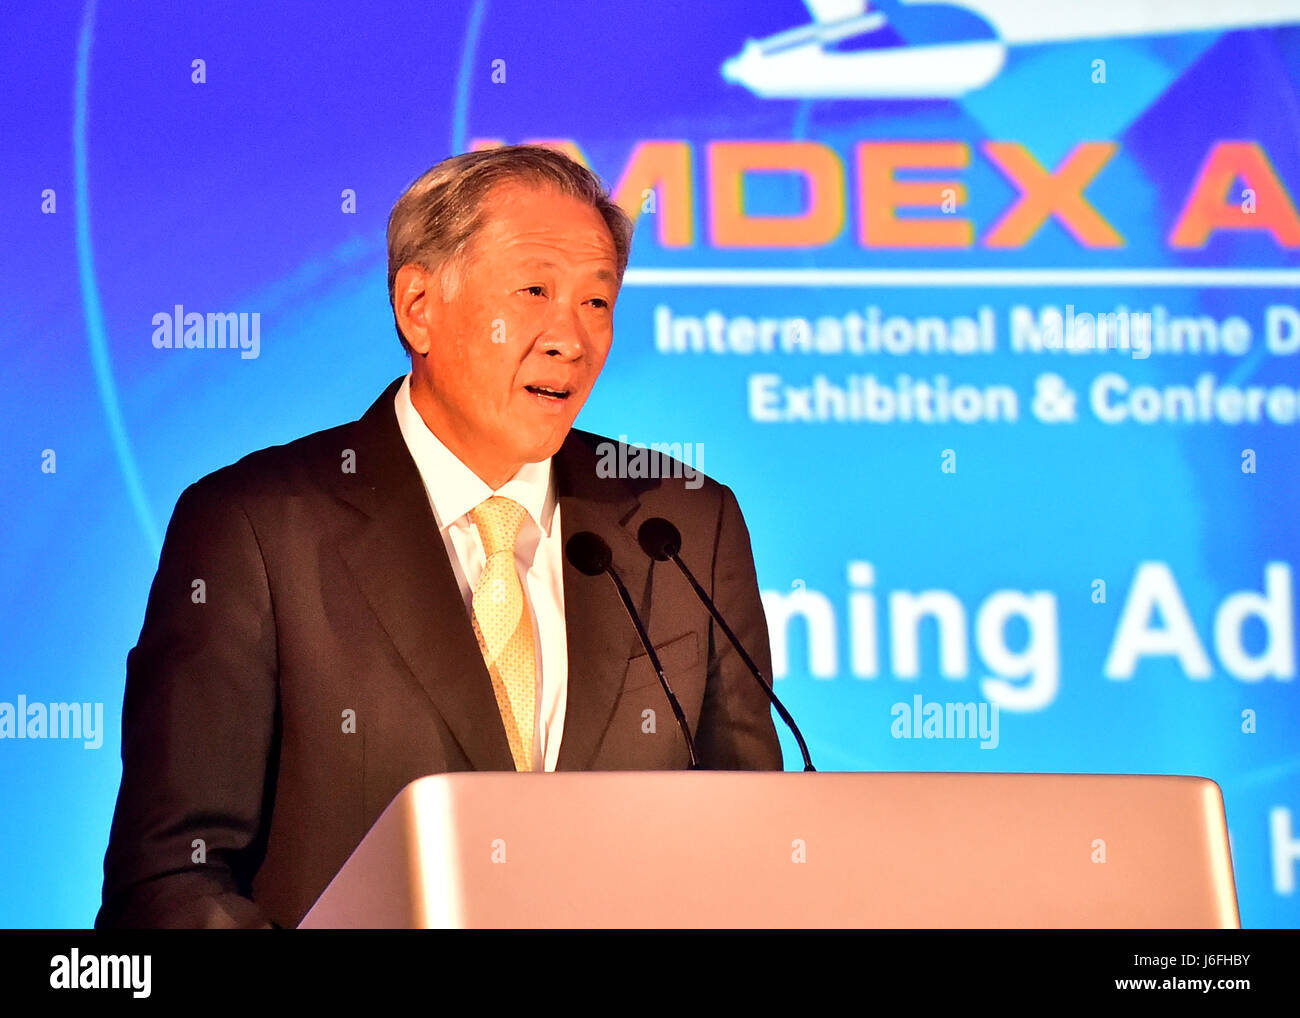 170516-N-QV906-022 SINGAPORE (March 16, 2017) Singapore Minister of Defense Dr. Ng Eng Hen delivers the opening remarks of The International Maritime Defense Exhibition 2017 (IMDEX-17) in at the Changi Exposition Center May 15. IMDEX-17 is hosted by the Republic of Singapore and is one of the largest maritime exhibitions in the Asia Pacific and features a trade show and a series of multilateral exercises and exchanges.  Twenty seven ships from 18 navies along with chiefs of navy from nations around the globe will participate in IMDEX 17. (U.S. Navy photo by Mass Communication Specialist 1st Cl Stock Photo